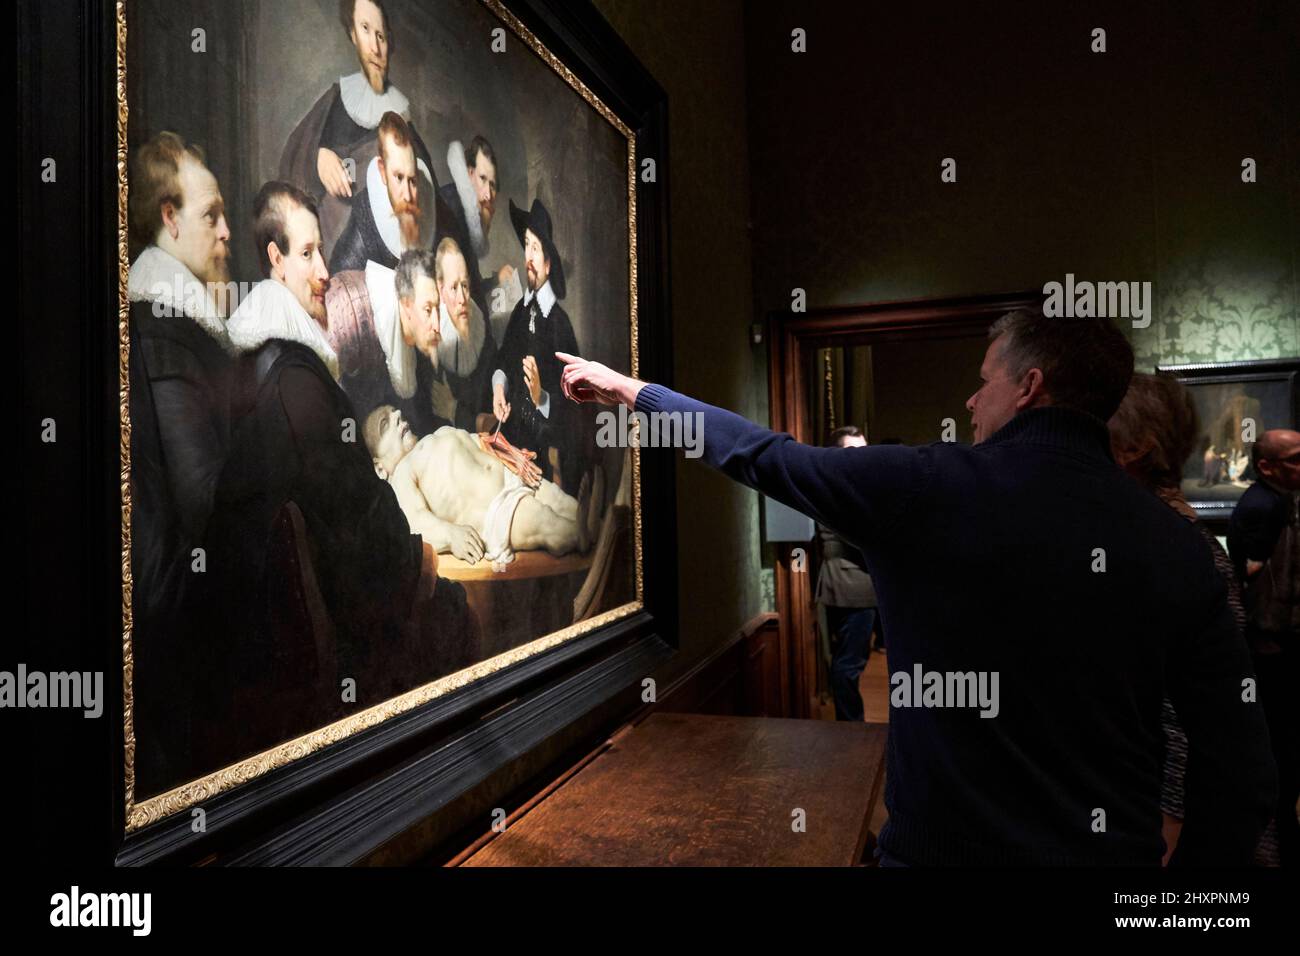 Visitors to the Mauritshuis Museum looking at Rembrandt's painting 'Anatomy Lesson'. Stock Photo